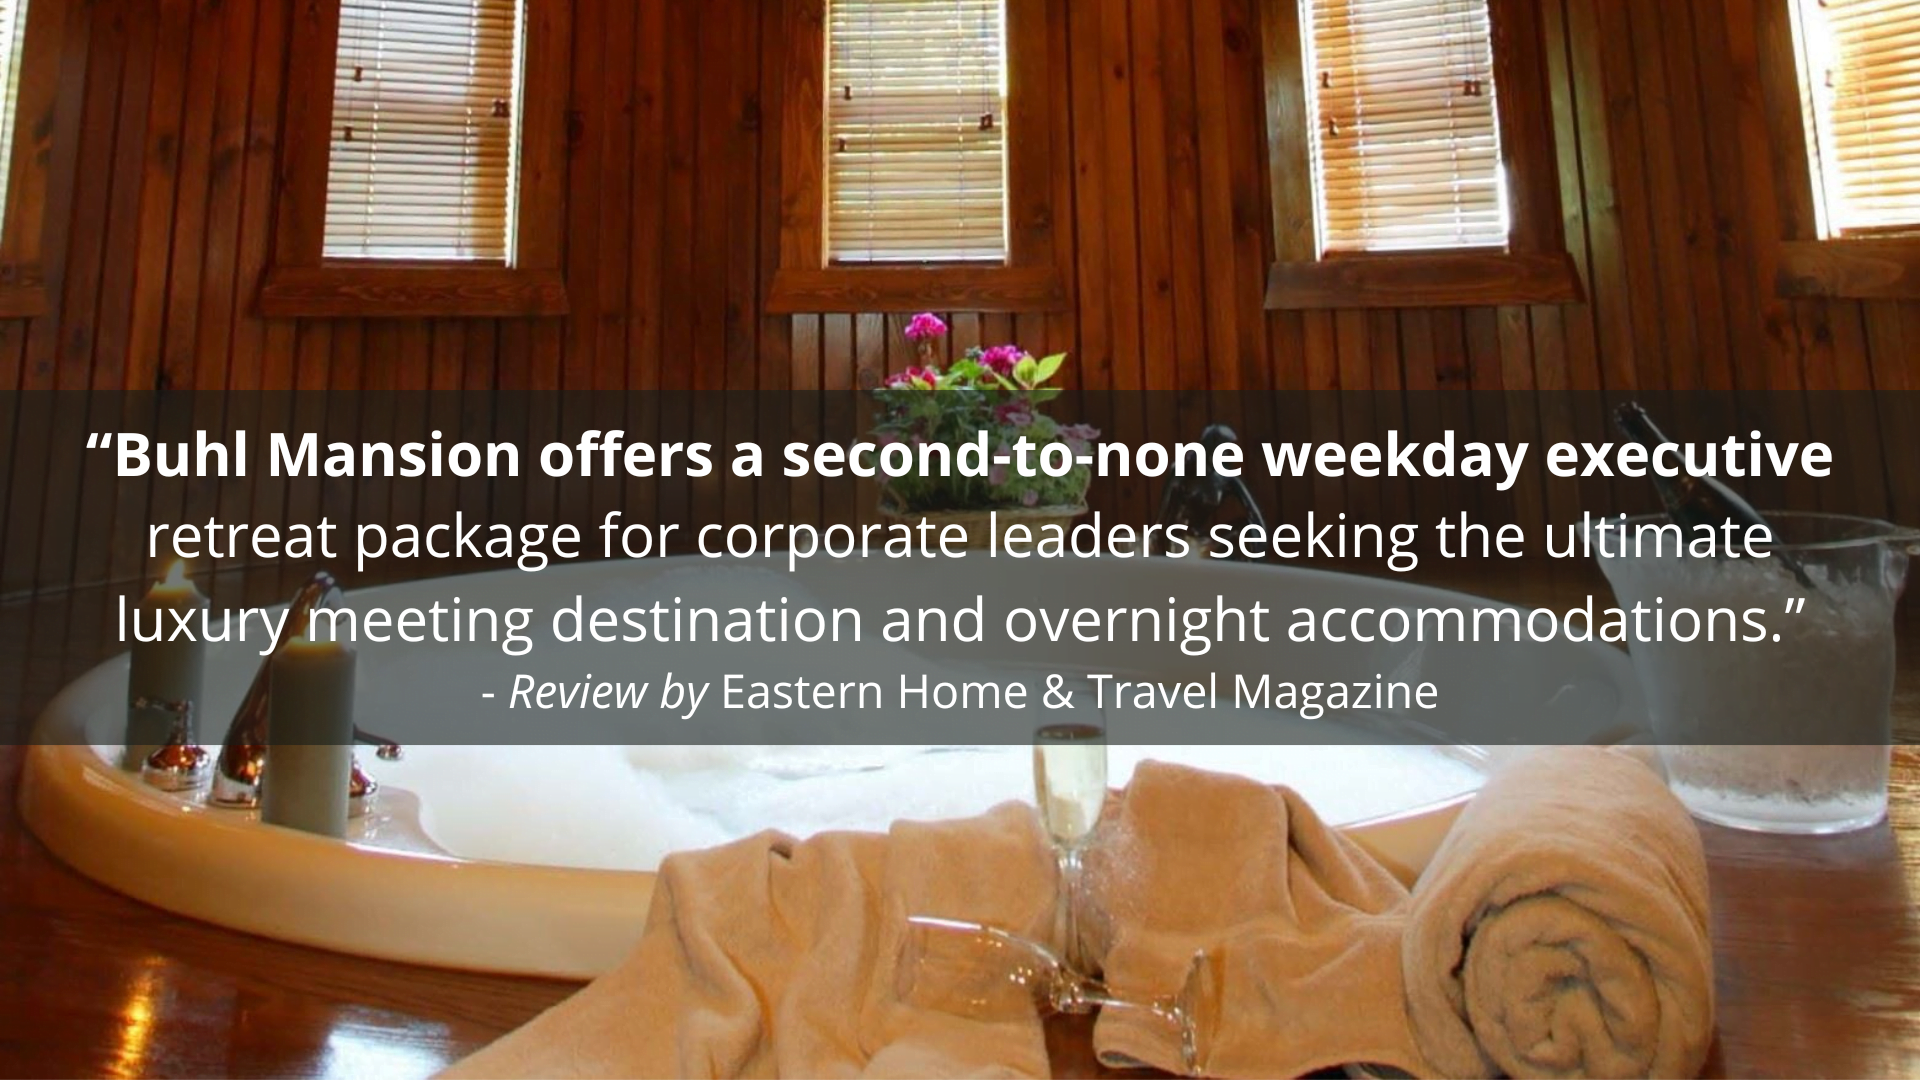 "Buhl Mansion offers a second-to-none weekday executive retreat package for corporate leaders seeking the ultimate luxury meeting destination and overnight accommodations." - Review by Eastern Home & Travel Magazine